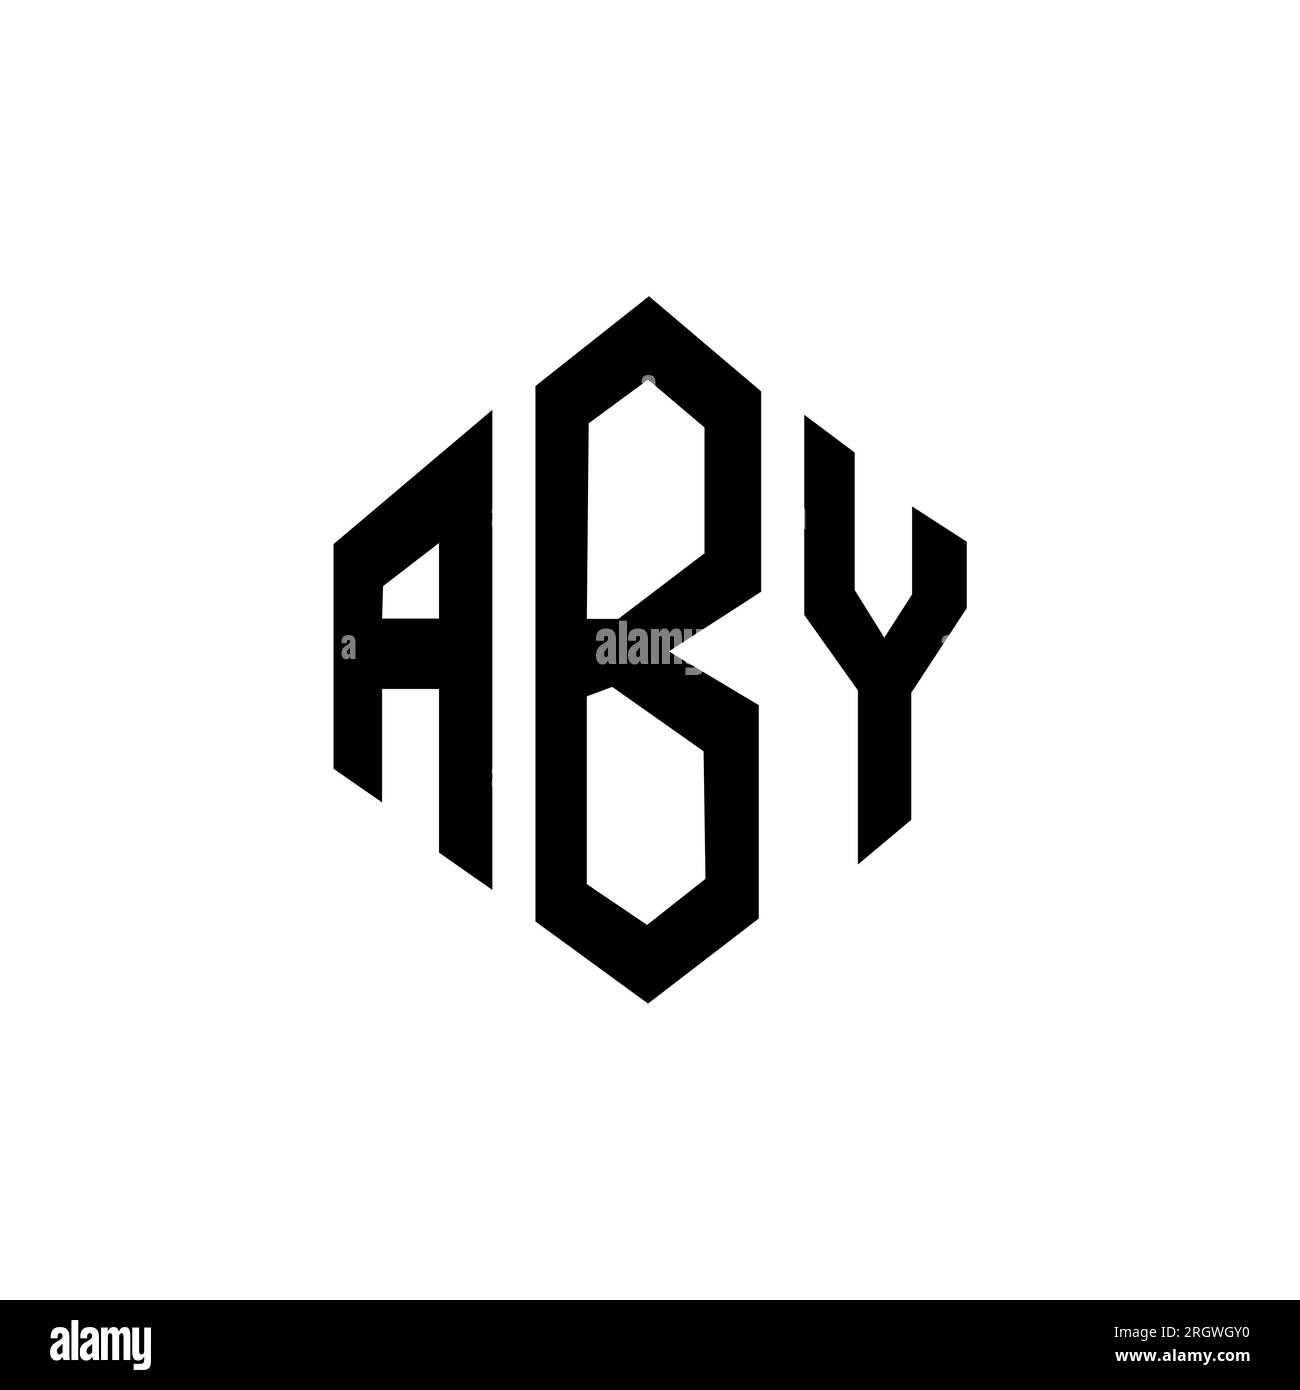 Aby business logo Cut Out Stock Images & Pictures - Alamy